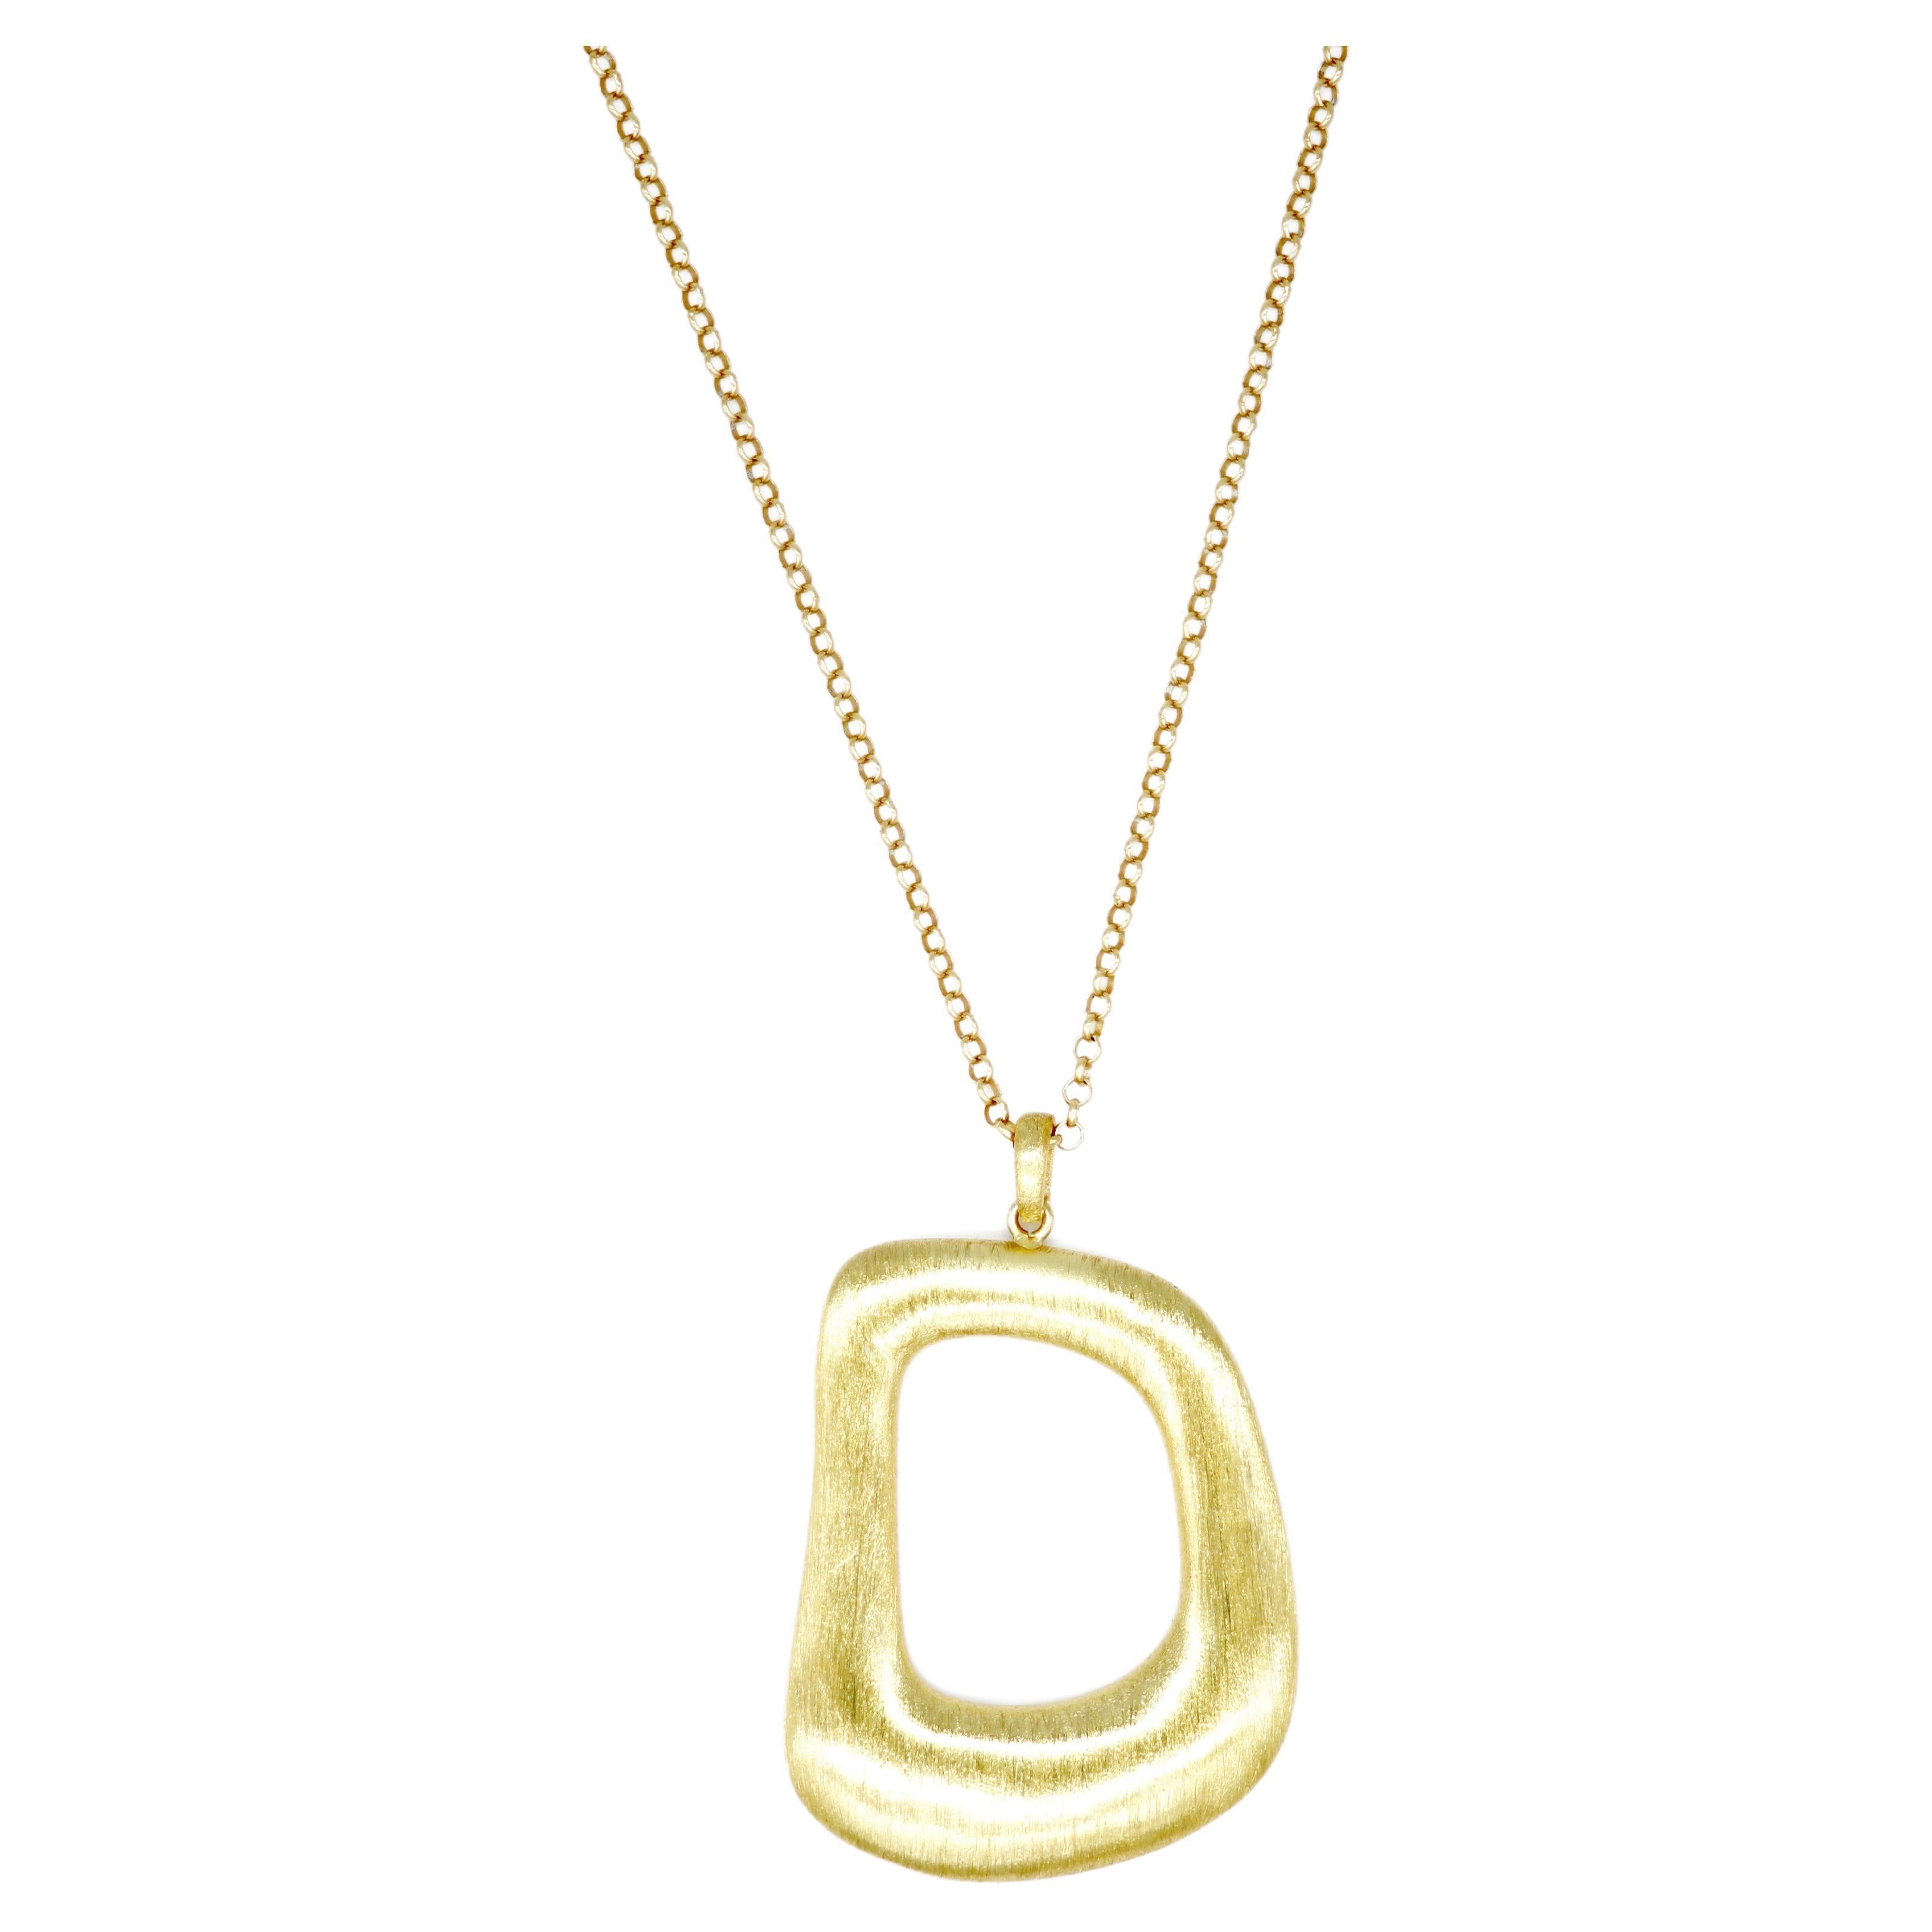 Pendant necklace, 925 sterling silver, 18 kt. gold plated, Amanda